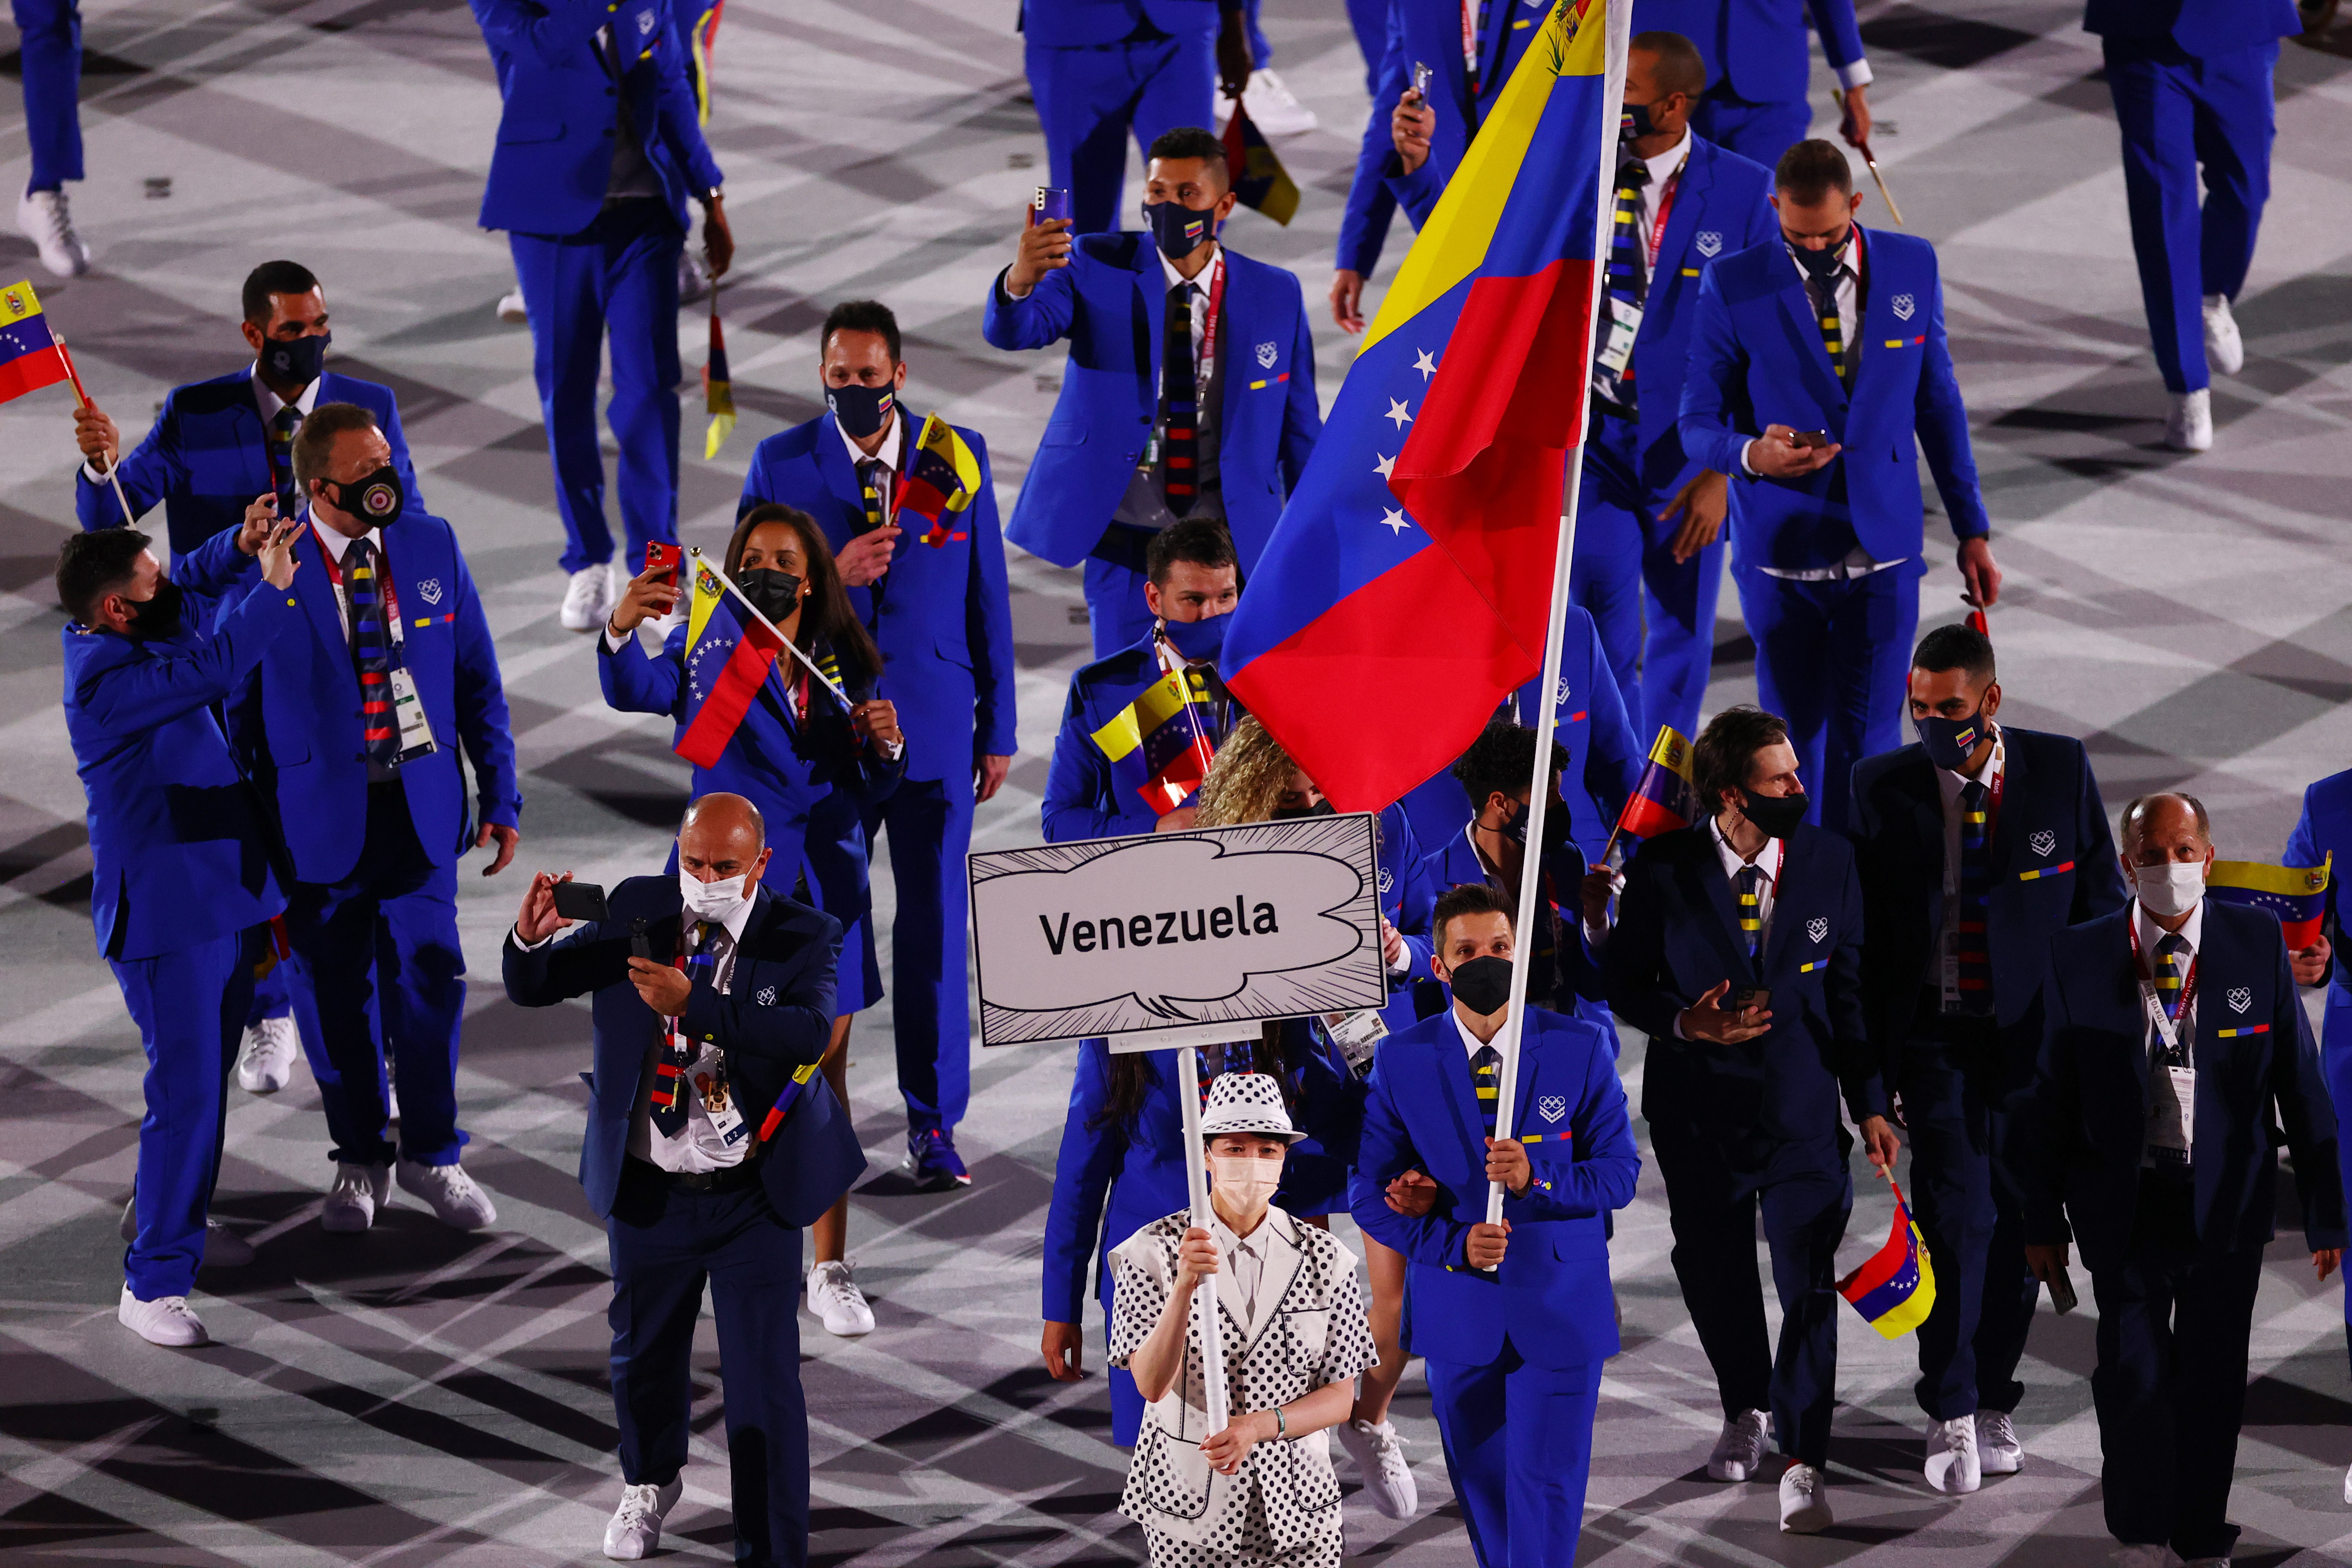 Tokyo 2020 Olympics - The Tokyo 2020 Olympics Opening Ceremony - Olympic Stadium, Tokyo, Japan - July 23, 2021. Flag bearers Karen Leon of Venezuela and Antonio Diaz of Venezuela lead their contingent during the athletes parade at the opening ceremony REUTERS/Mike Blake